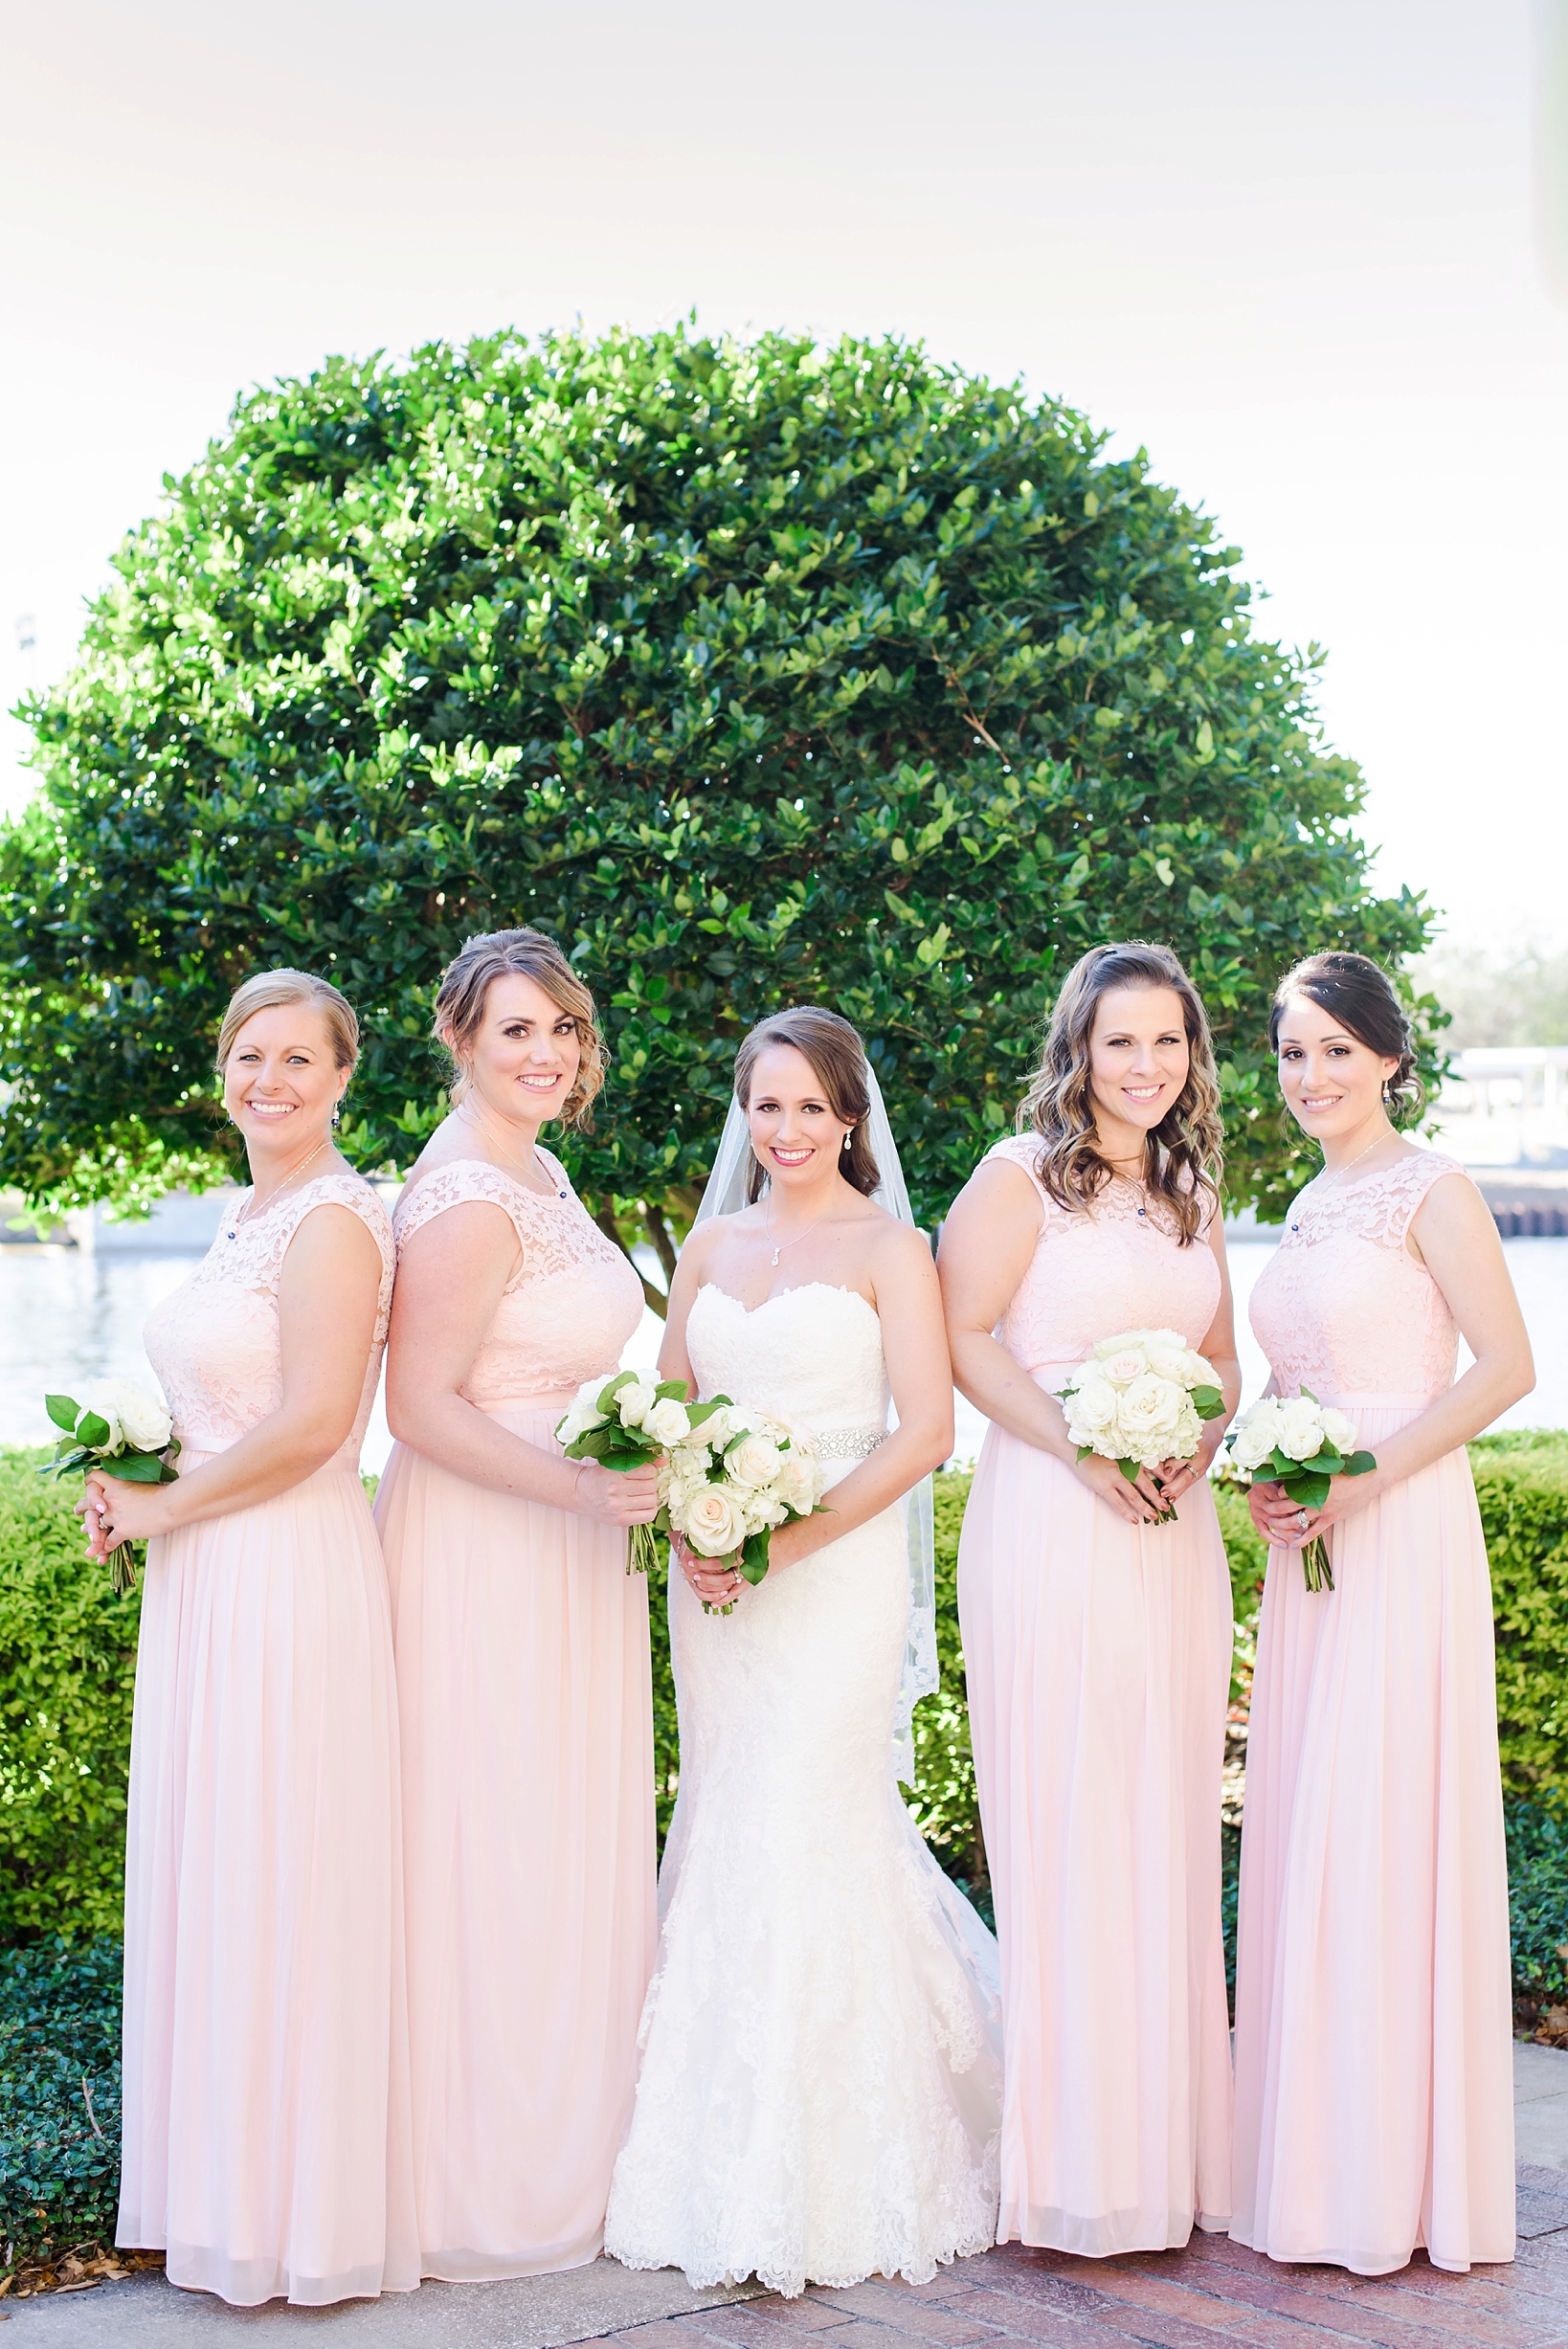 Bride with her Bridesmaids all holding flowers